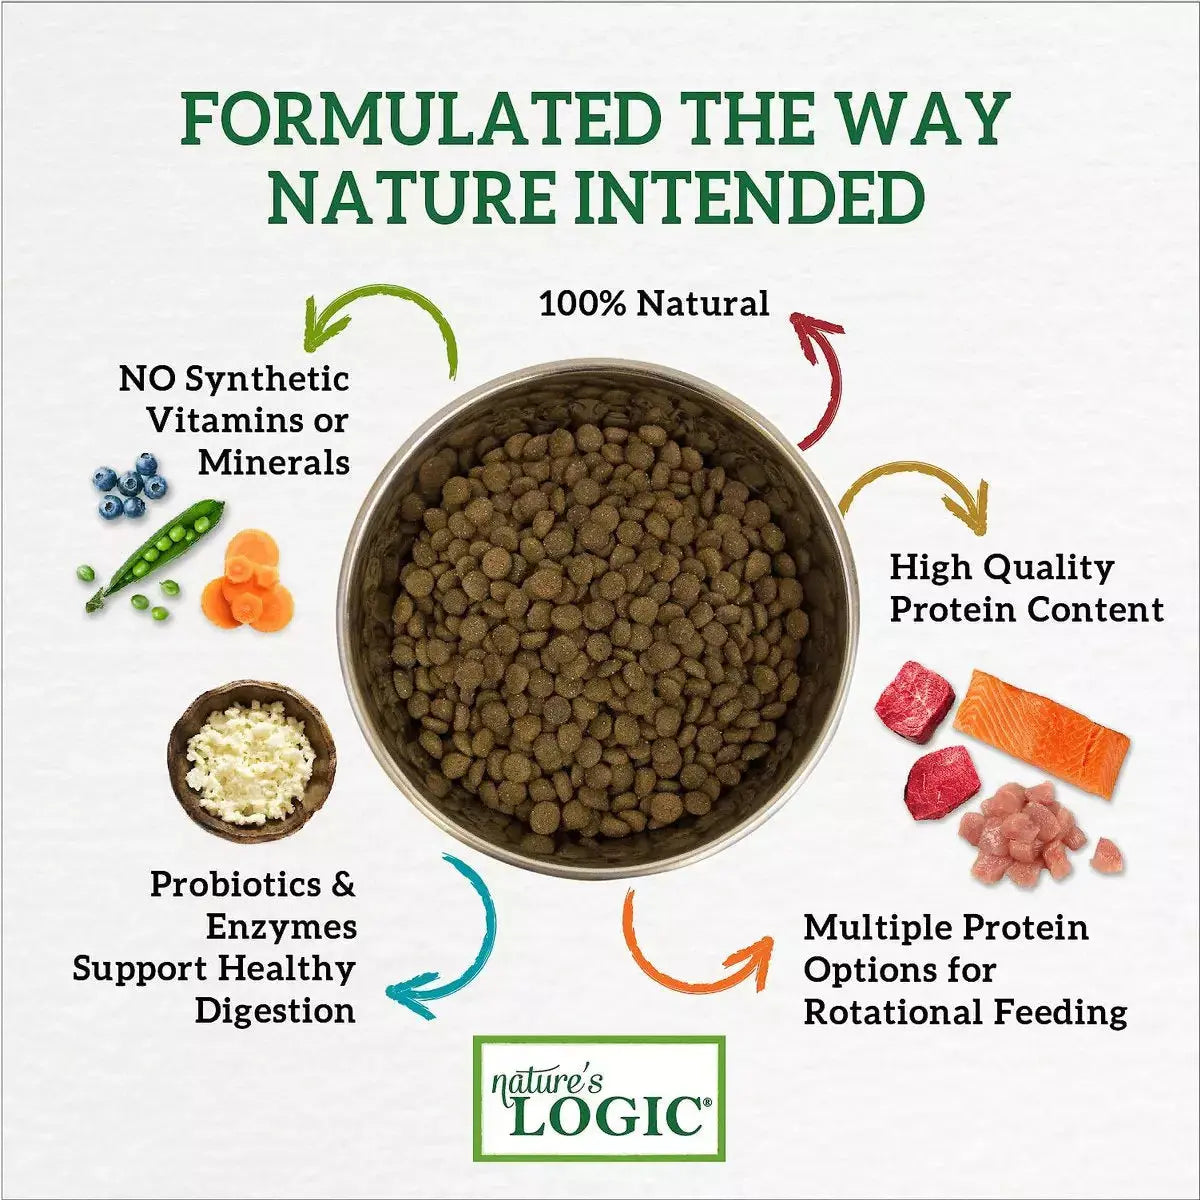 Nature's Logic Canine Chicken Meal Feast Dry Dog Food Nature's Logic